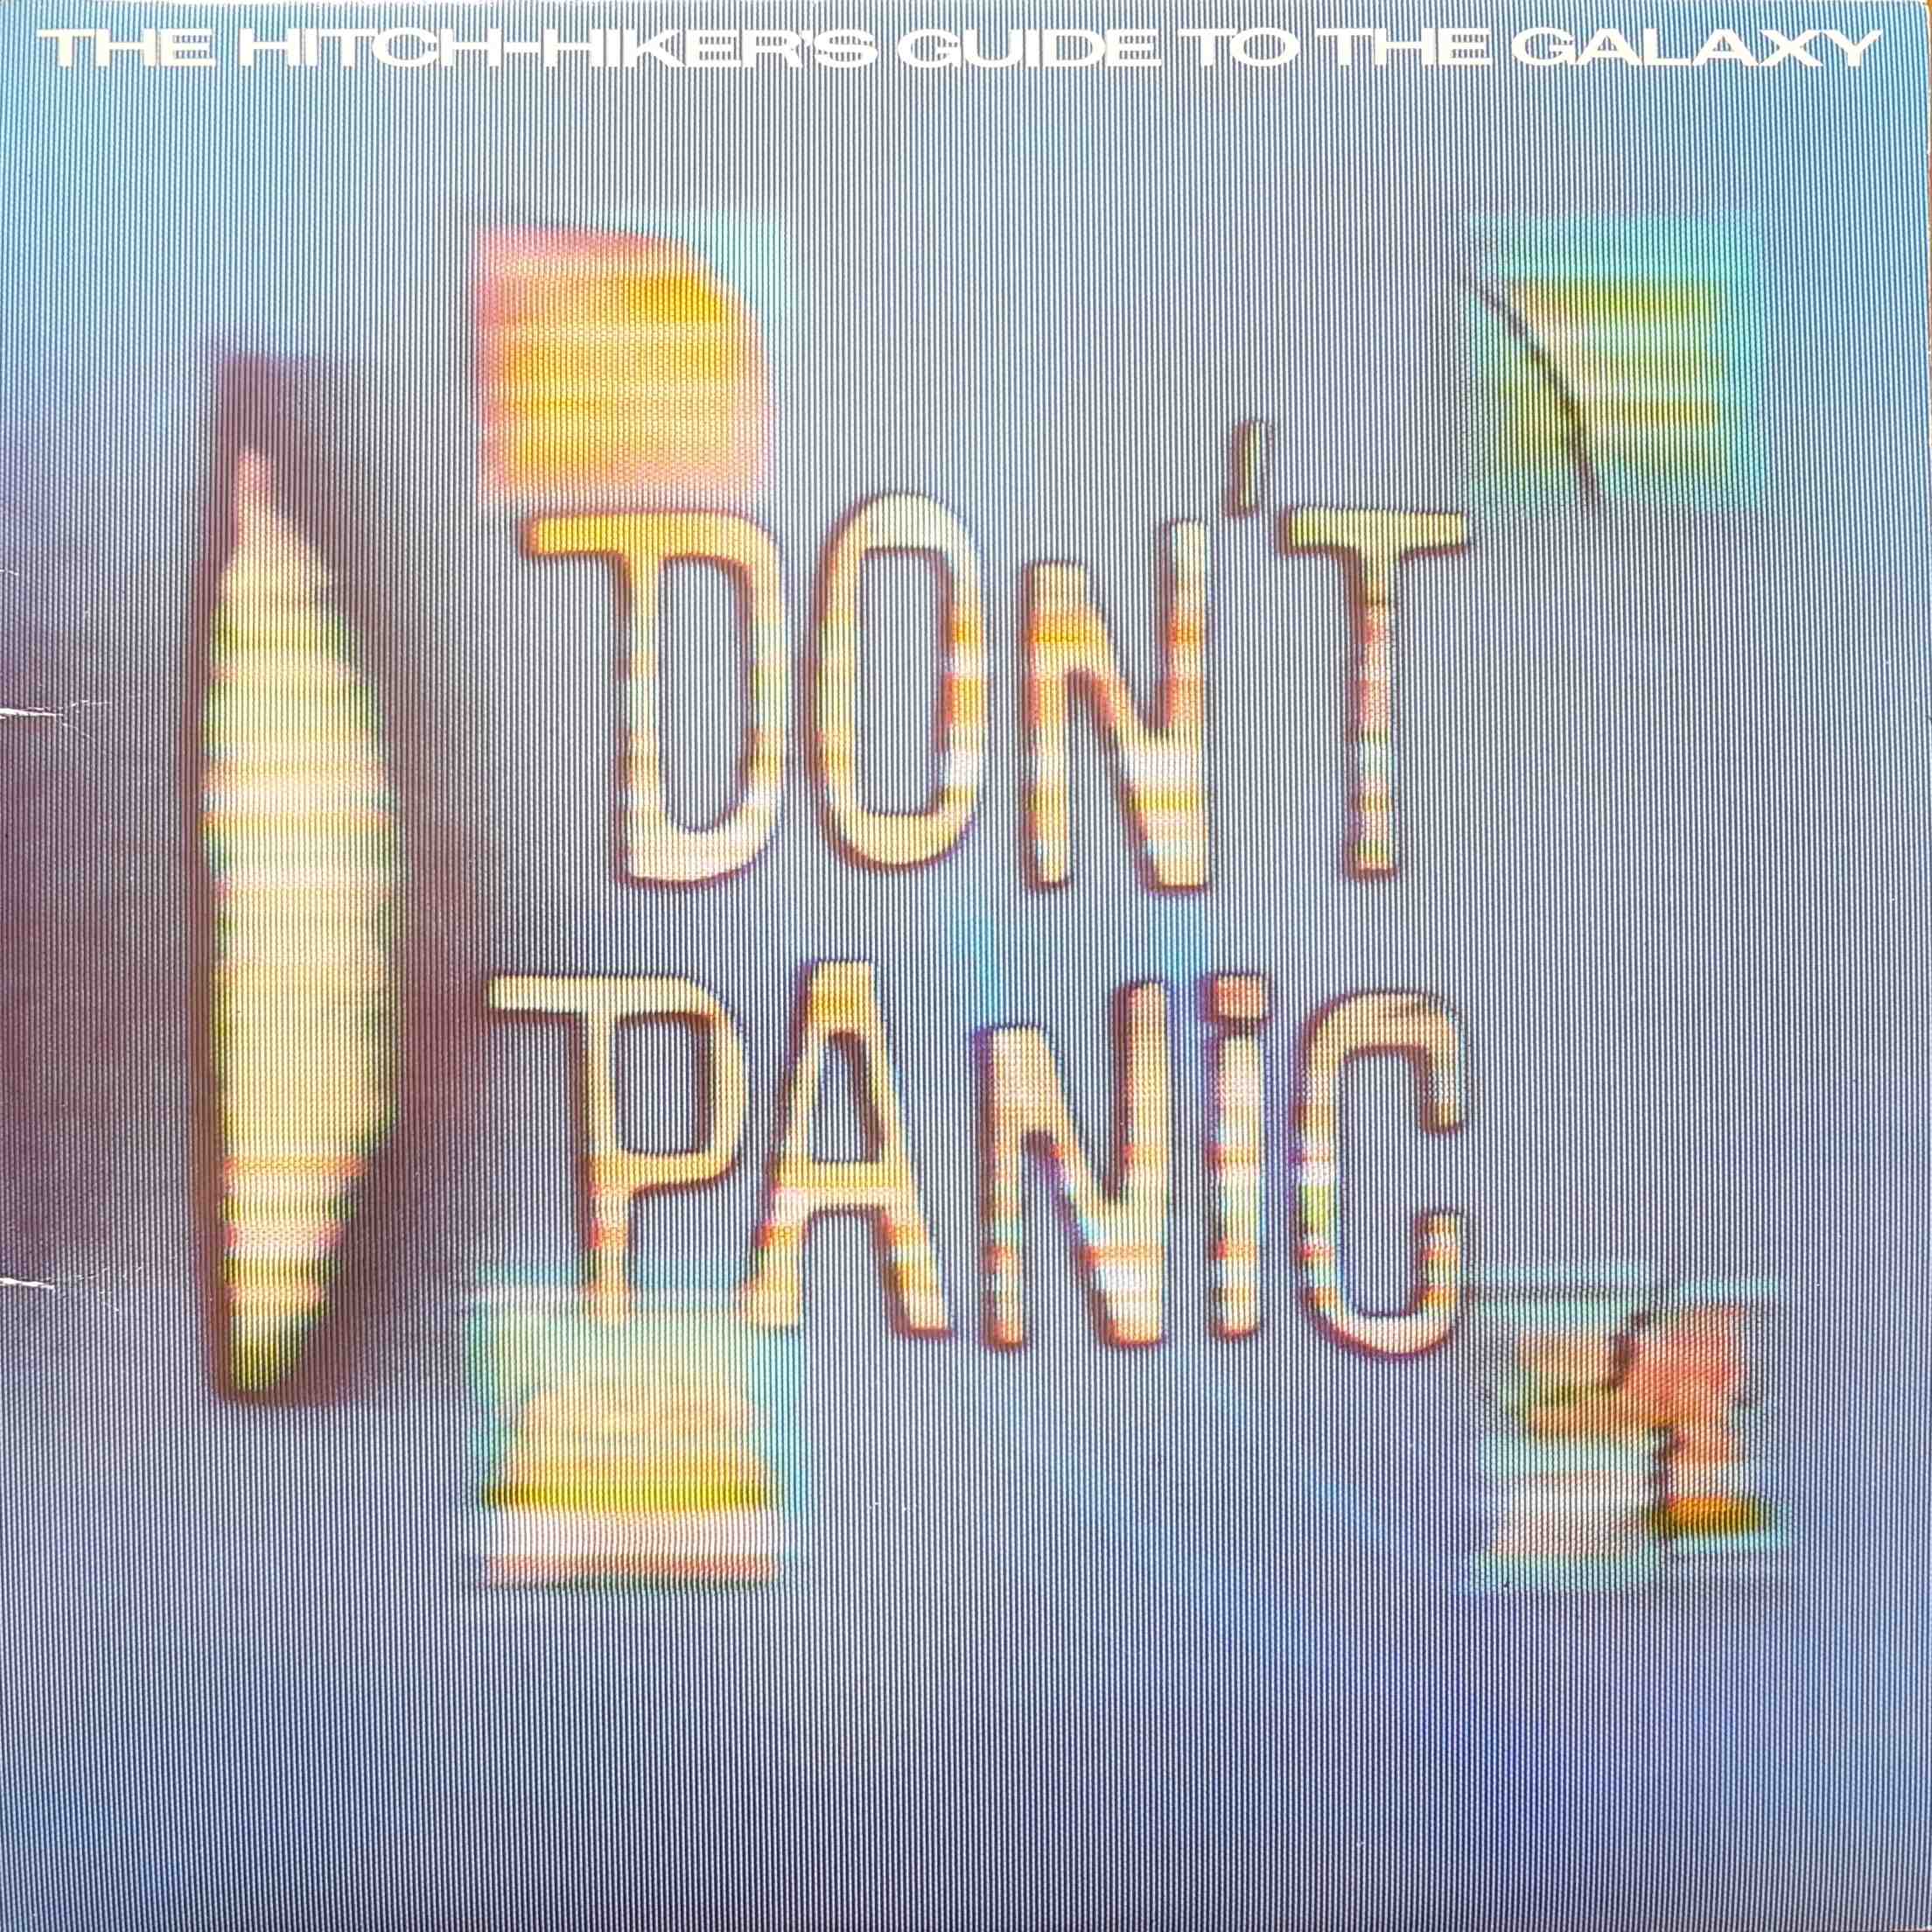 Picture of The hitch-hiker's guide to the Galaxy by artist Douglas Adams from the BBC albums - Records and Tapes library